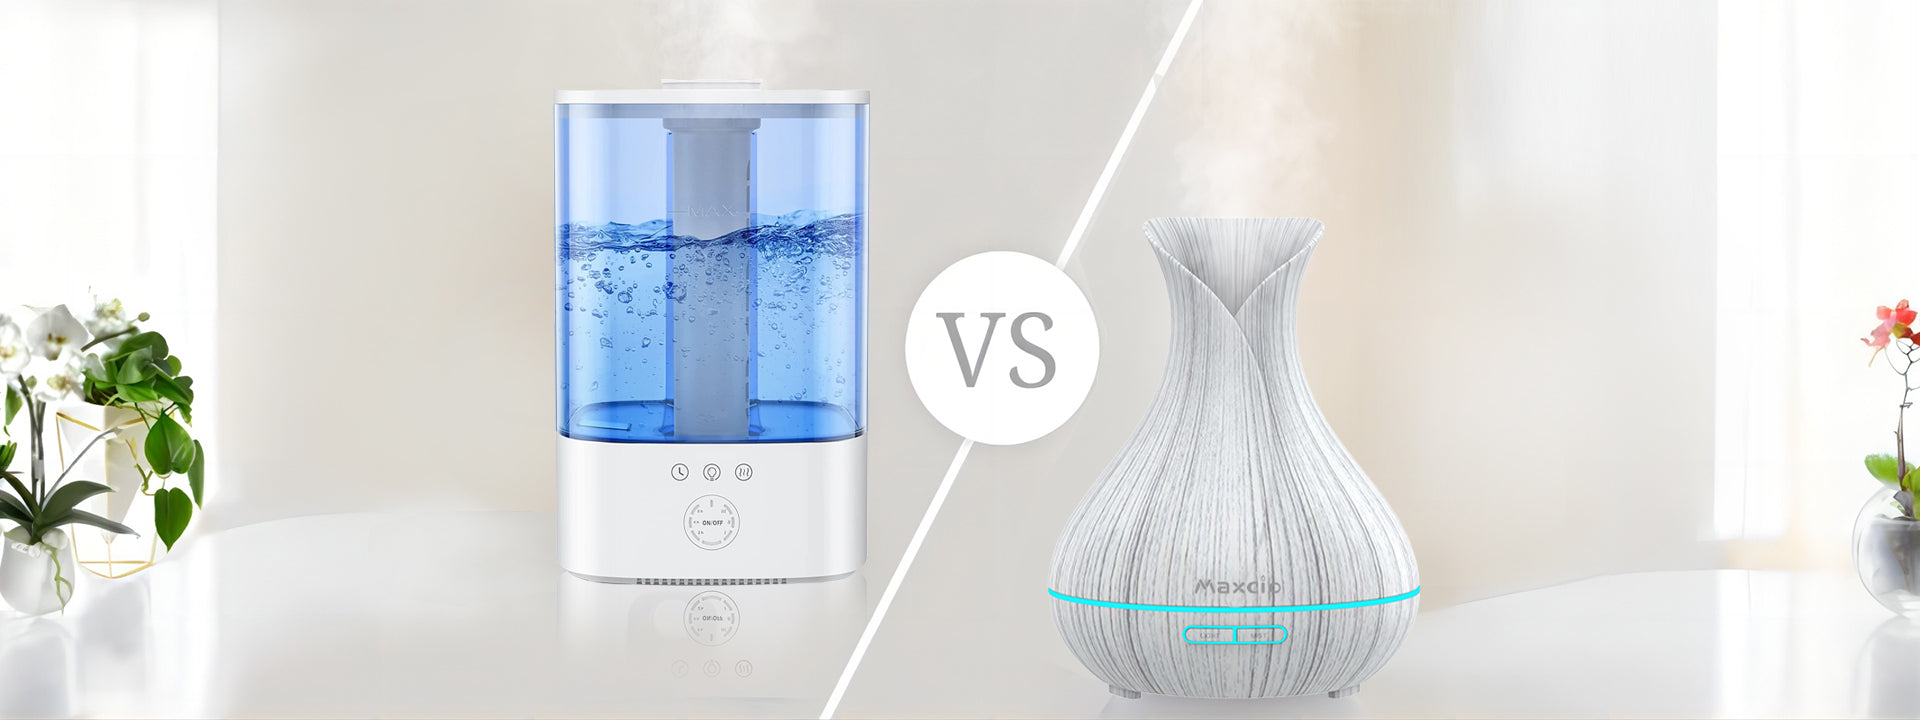 Diffuser vs Humidifier: Which Is Better for Your Home